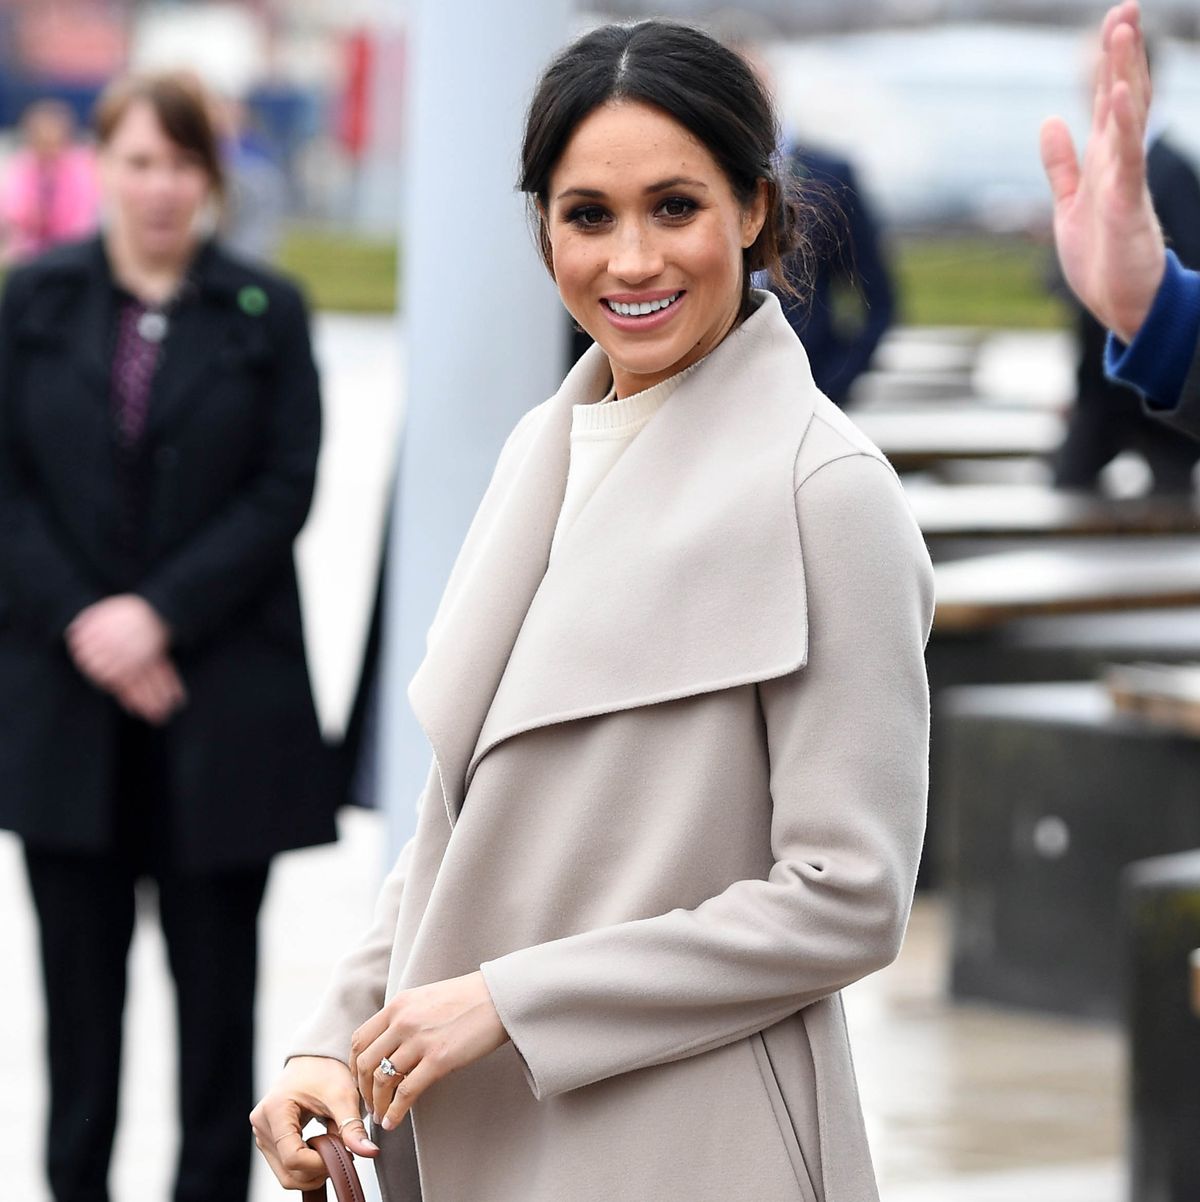 Prince Harry and Meghan Markle in Northern Ireland